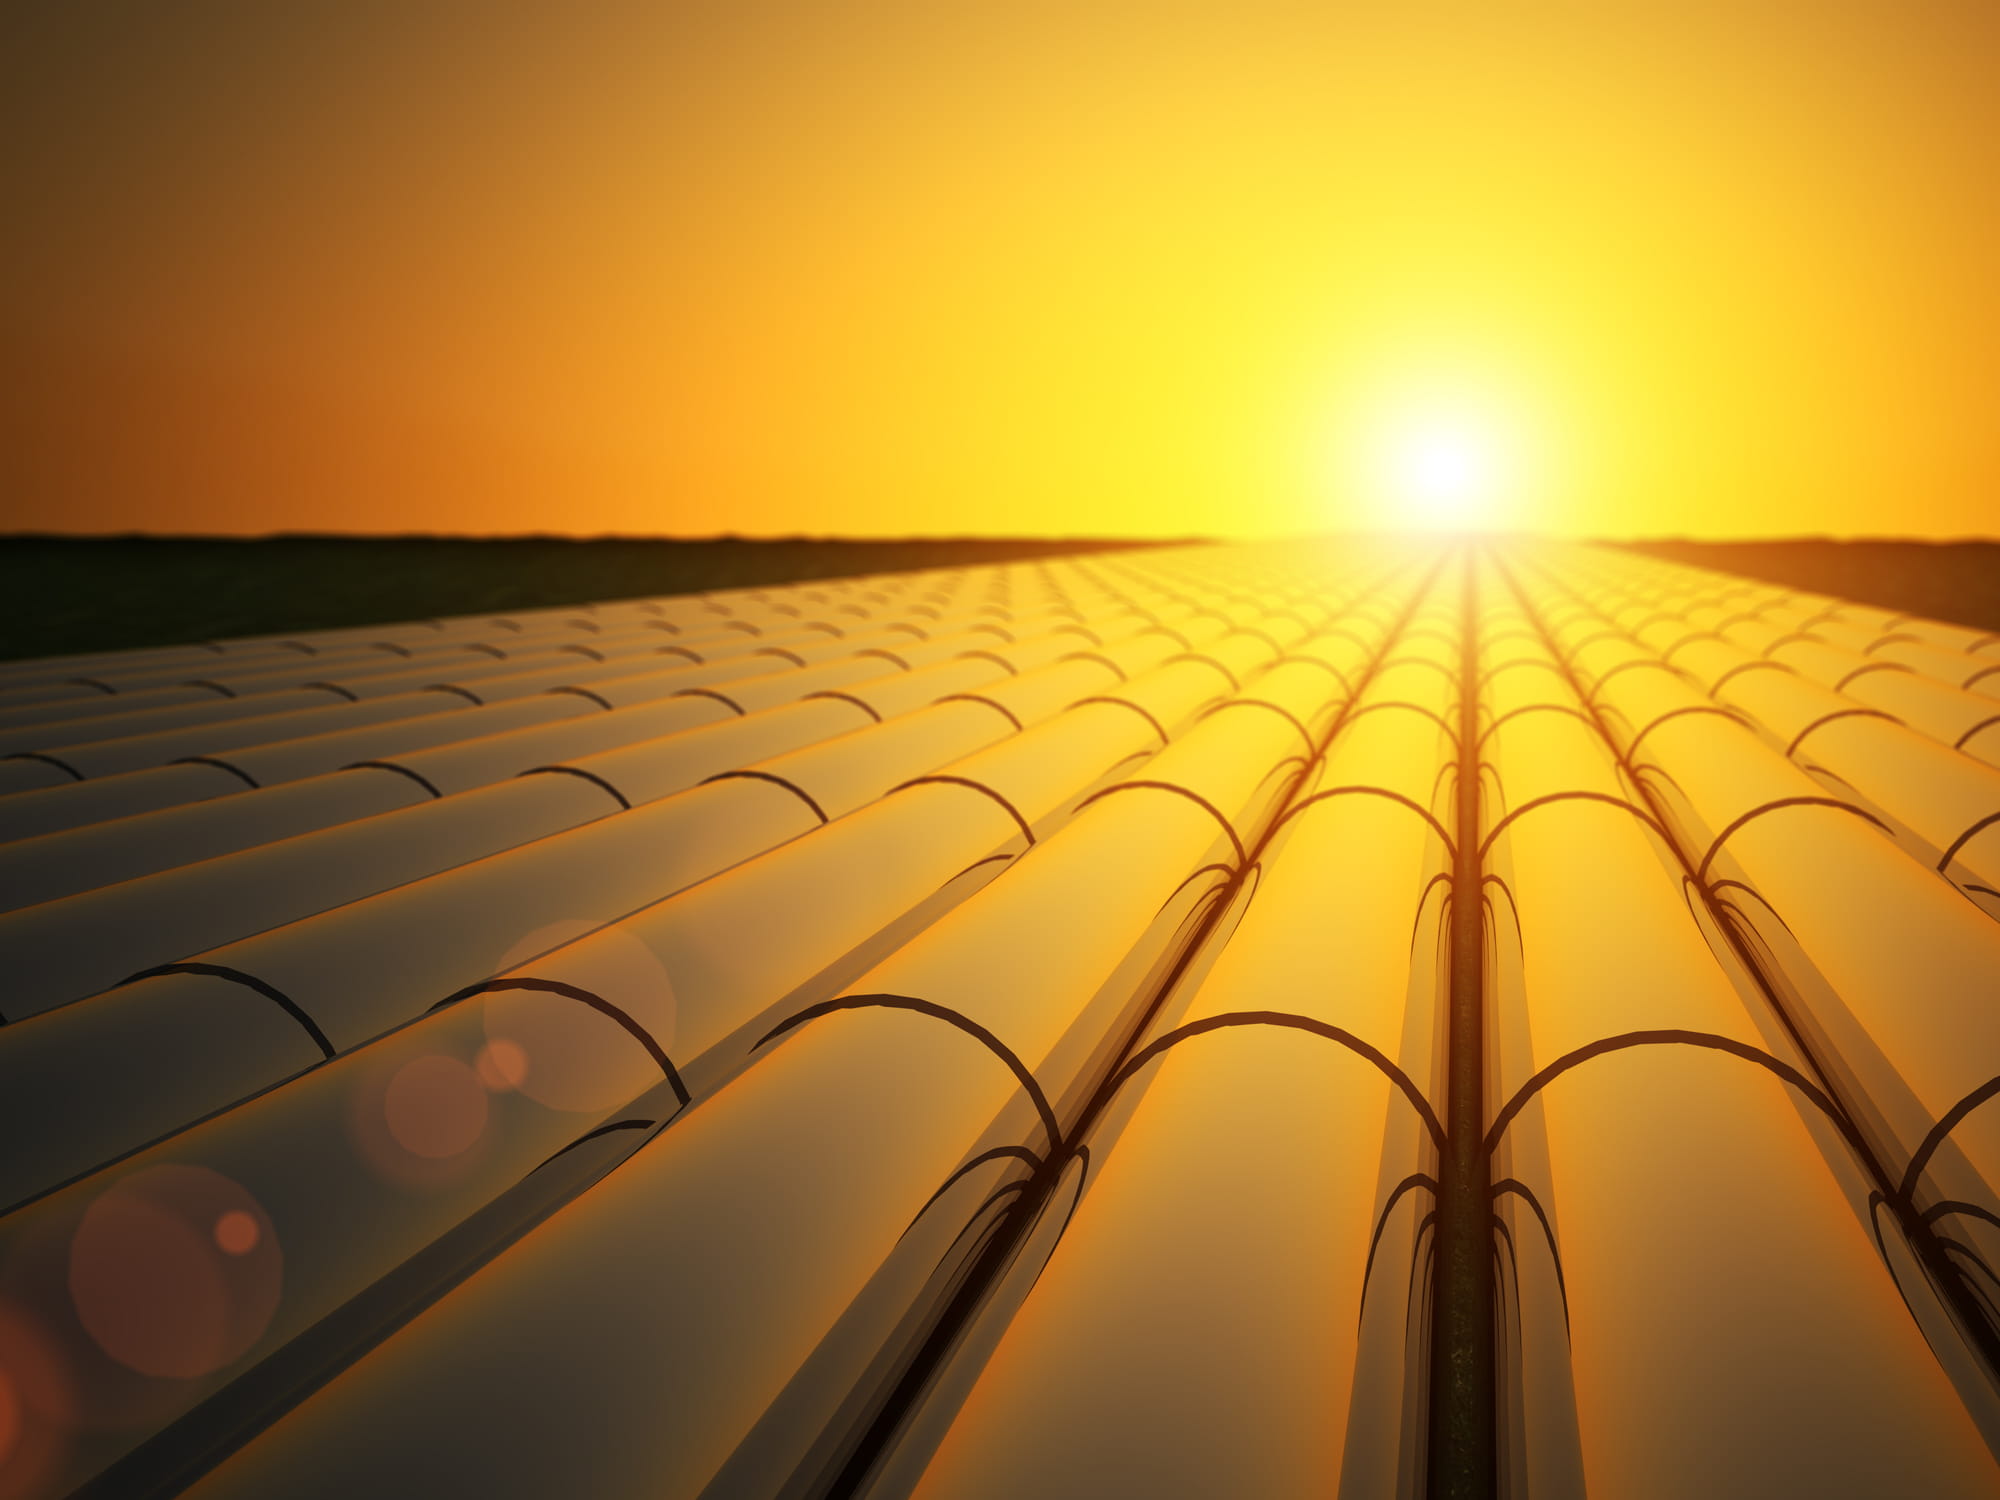 Gas pipelines at sunset